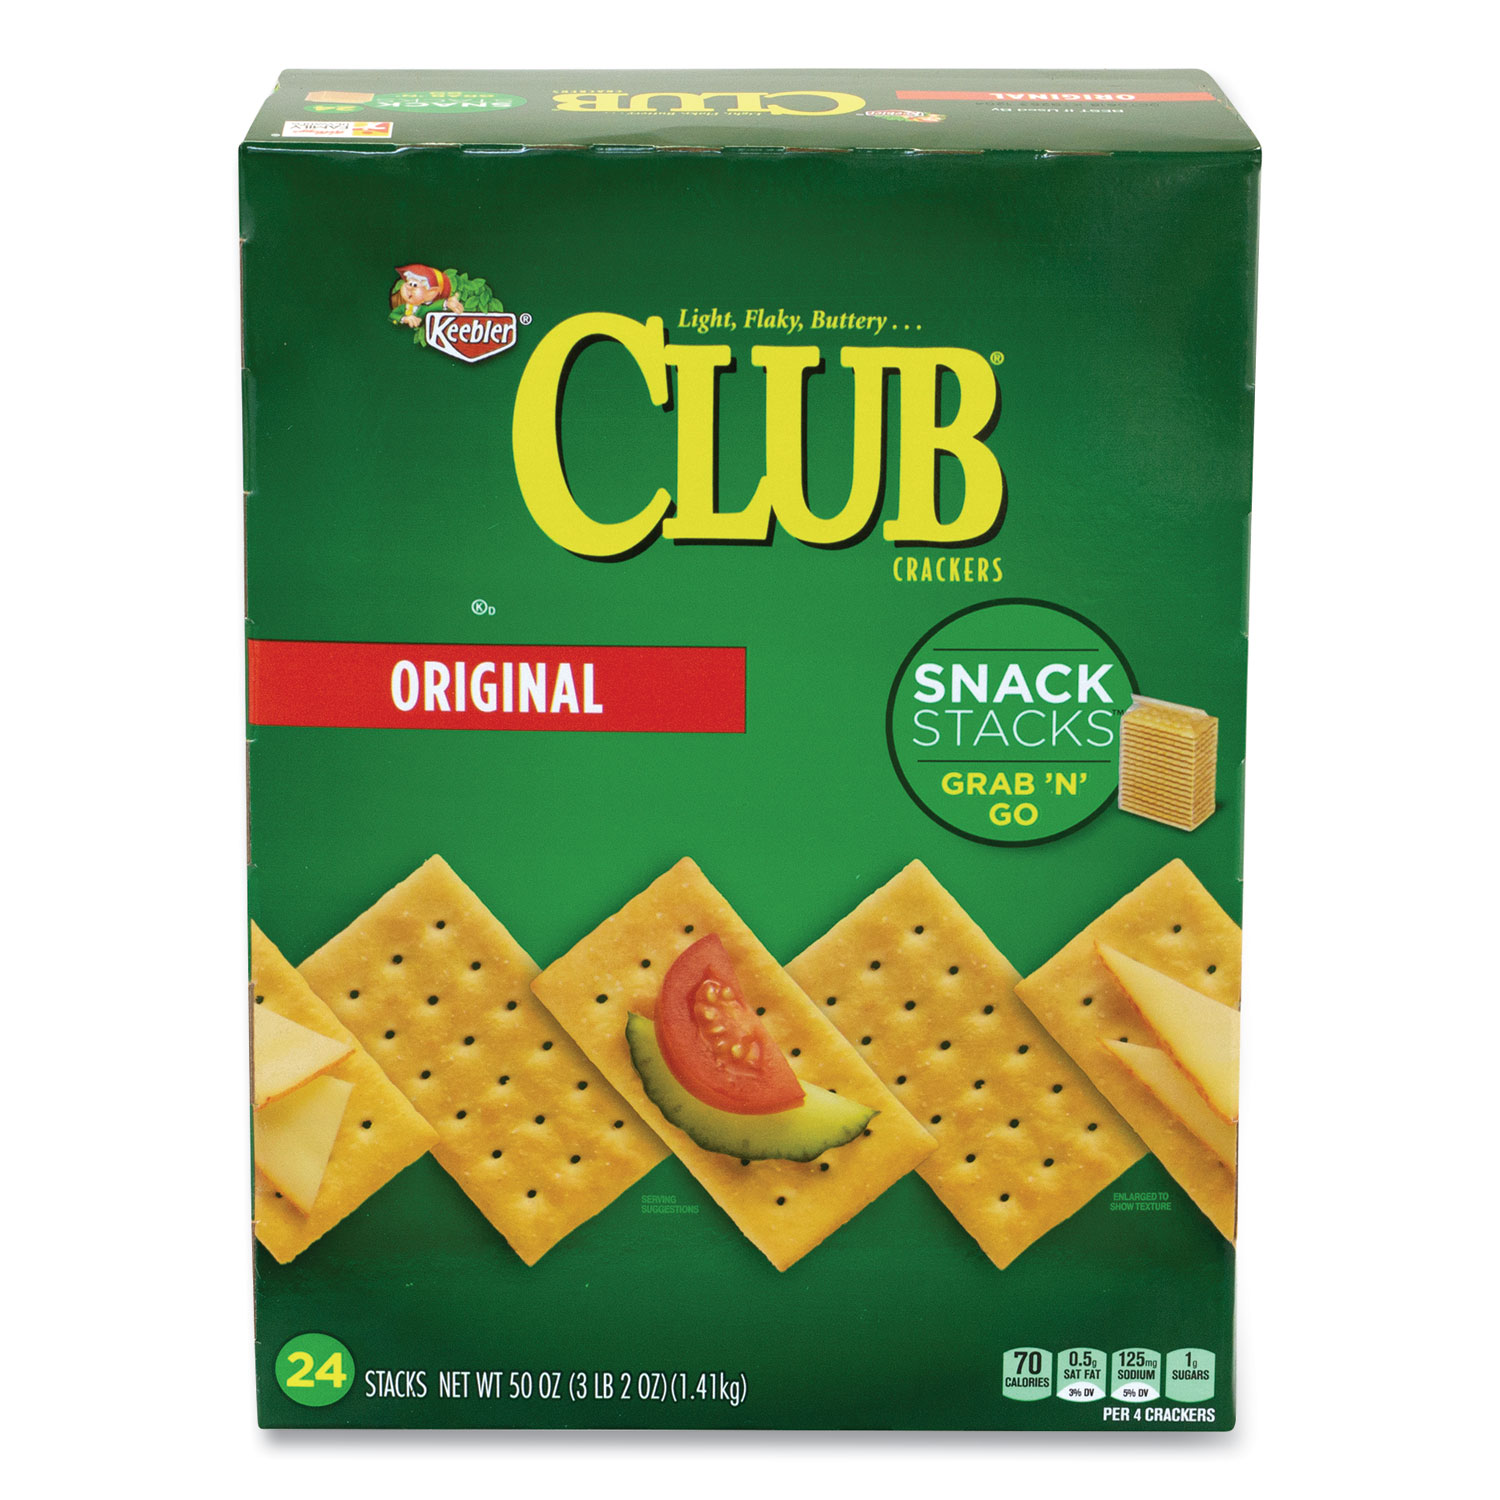 Keebler® Original Club Crackers Snack Stacks, 50 oz Box, Free Delivery in 1-4 Business Days